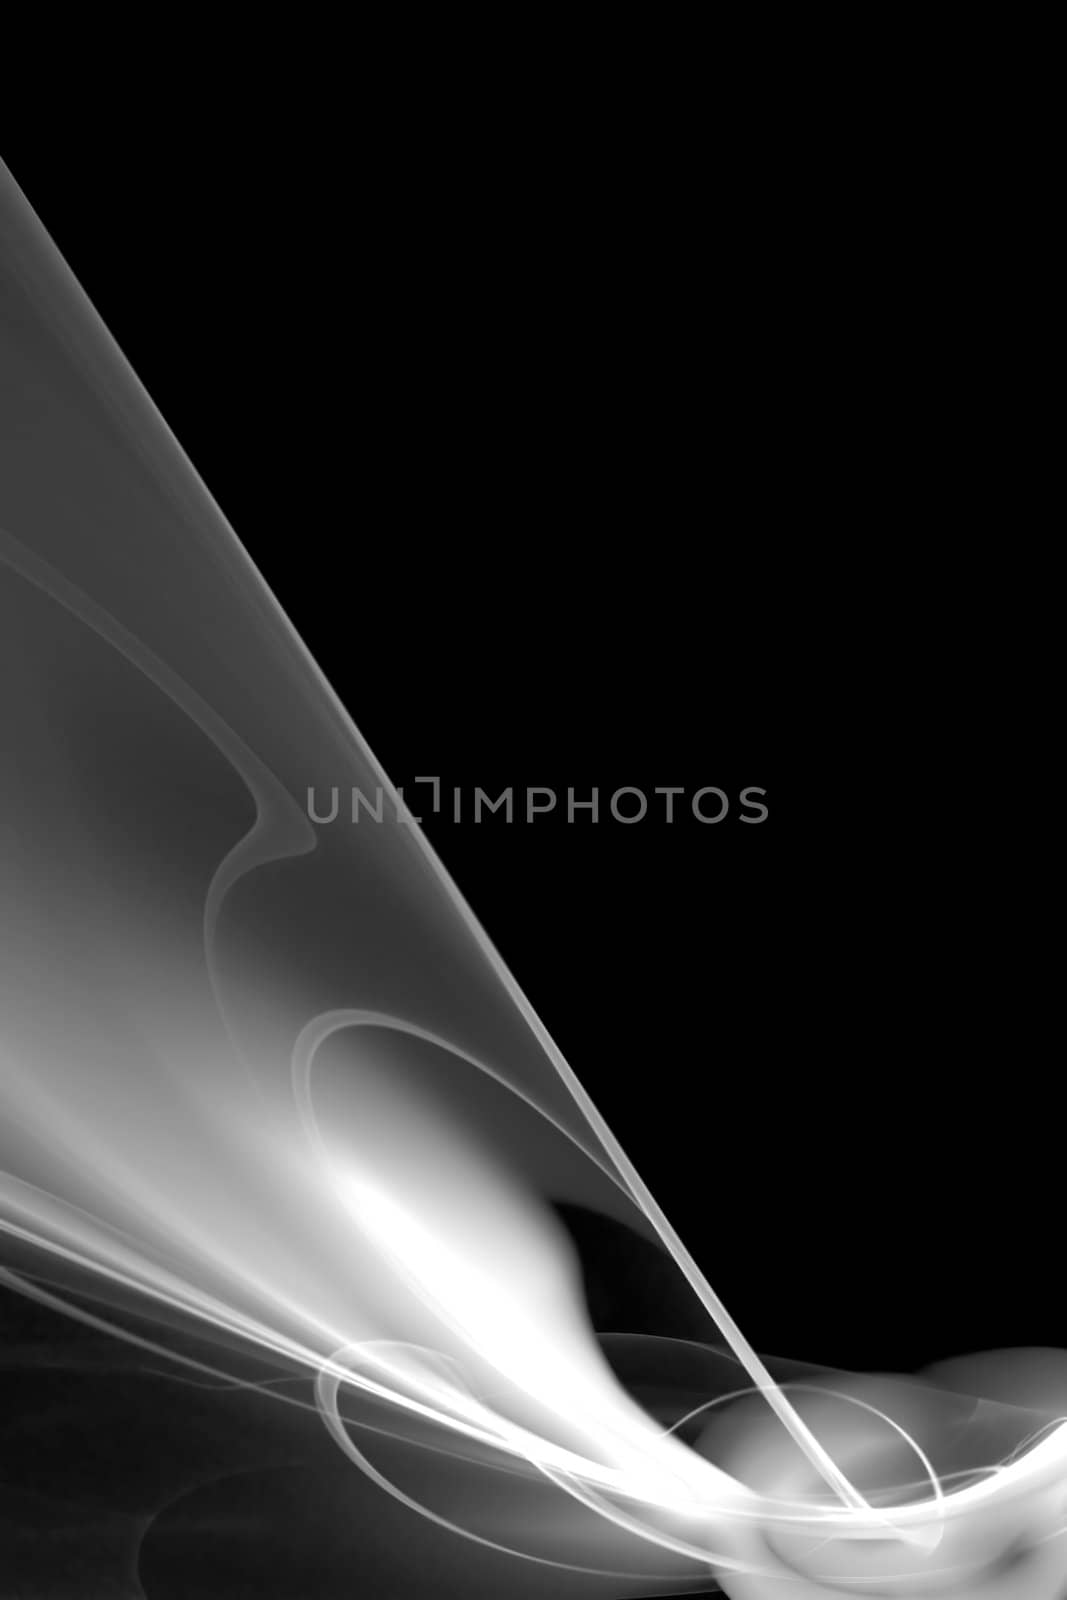 A 3D abstract design that looks like smoke over a black background.